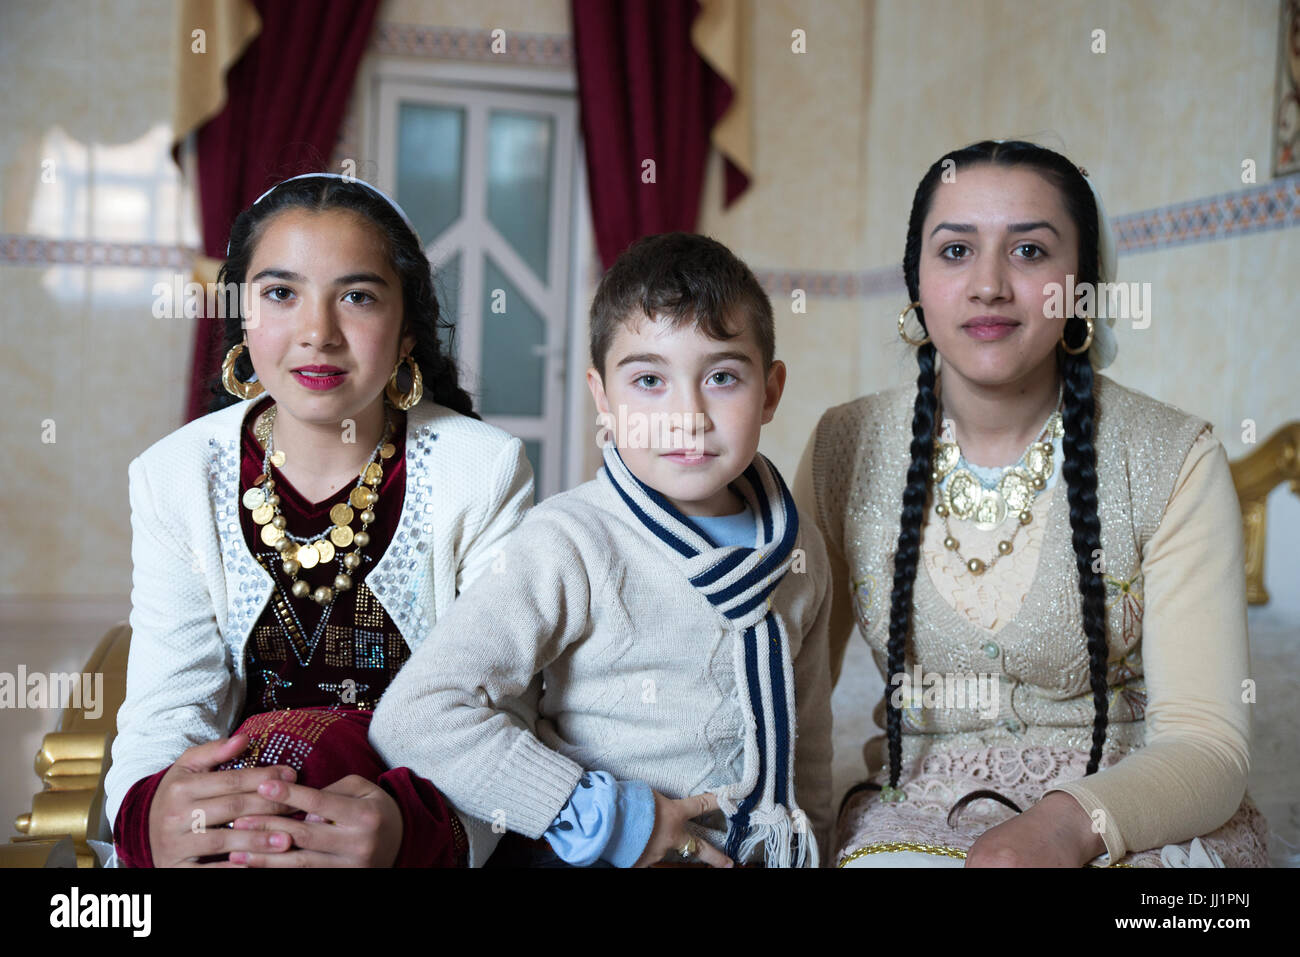 Kids of a wealthy Roma gypsy family posing in the luxurious bedroom of their house, Ivanesti, Romania Stock Photo